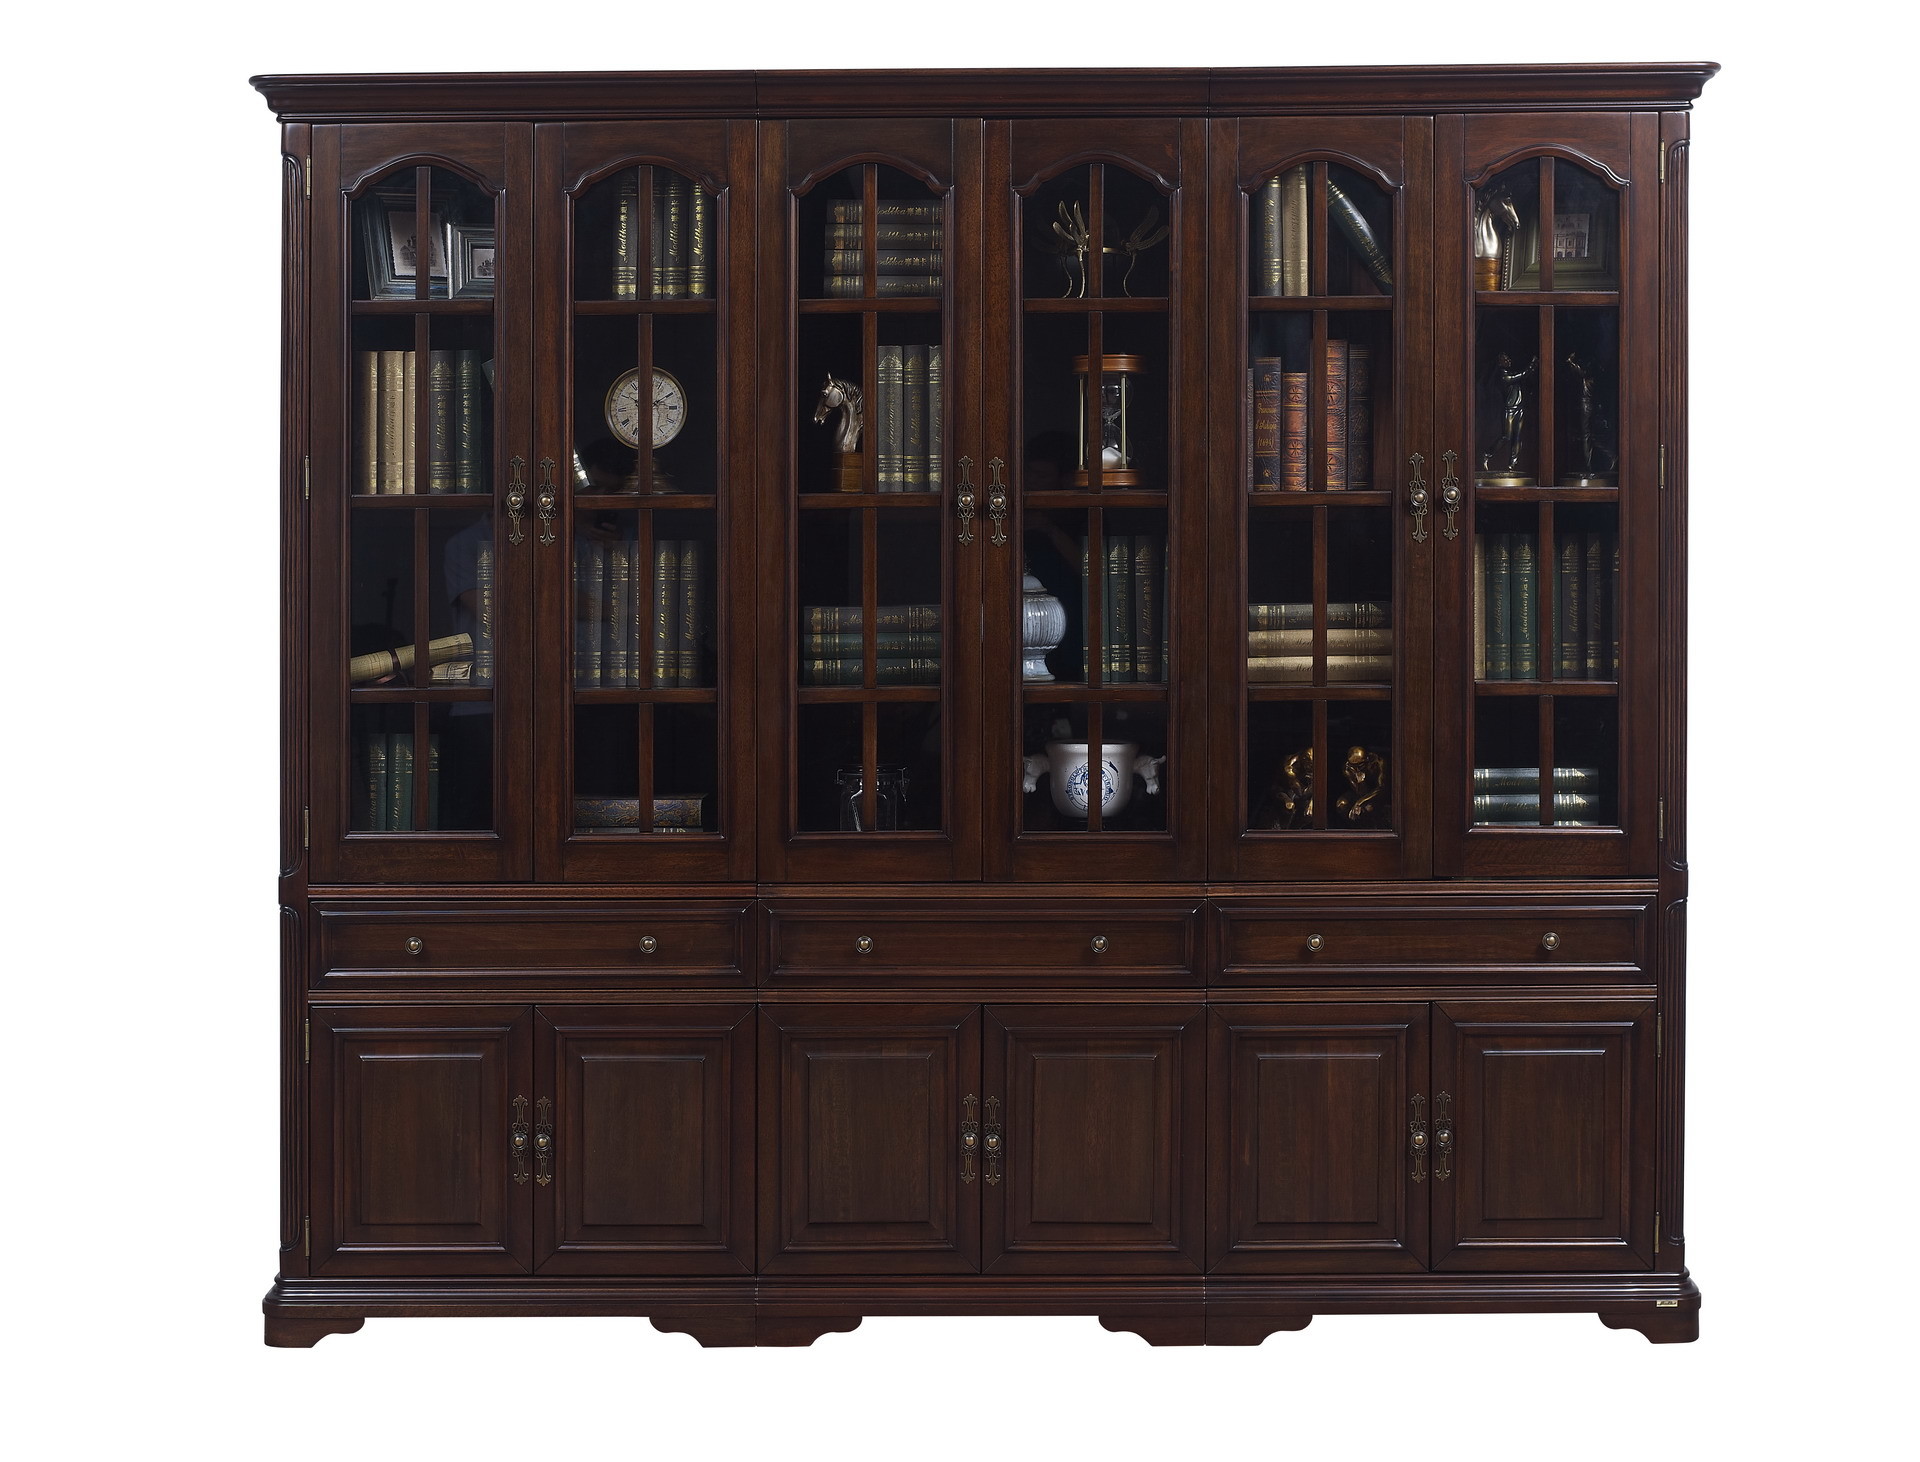 Best Home Office Study room furniture American style Big Bookcase Cabinet with Display chest can L shape for corner wall case wholesale